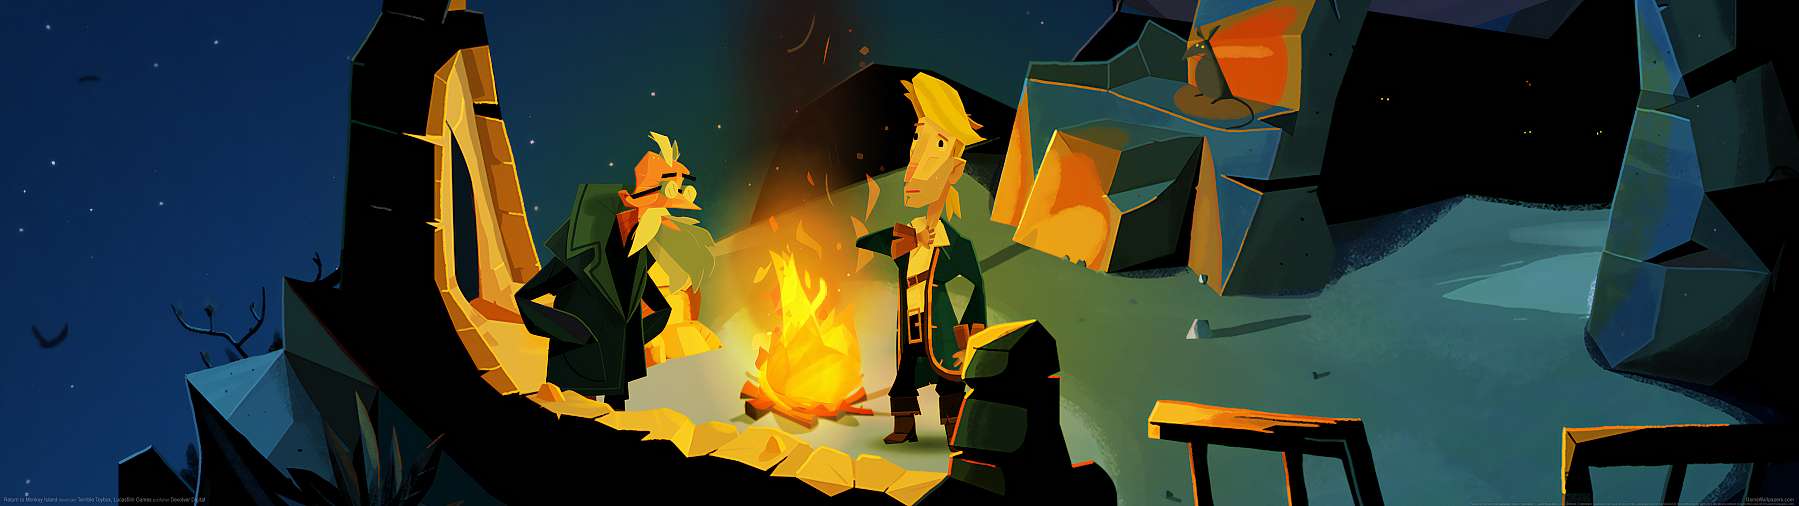 Return to Monkey Island superwide wallpaper or background 04